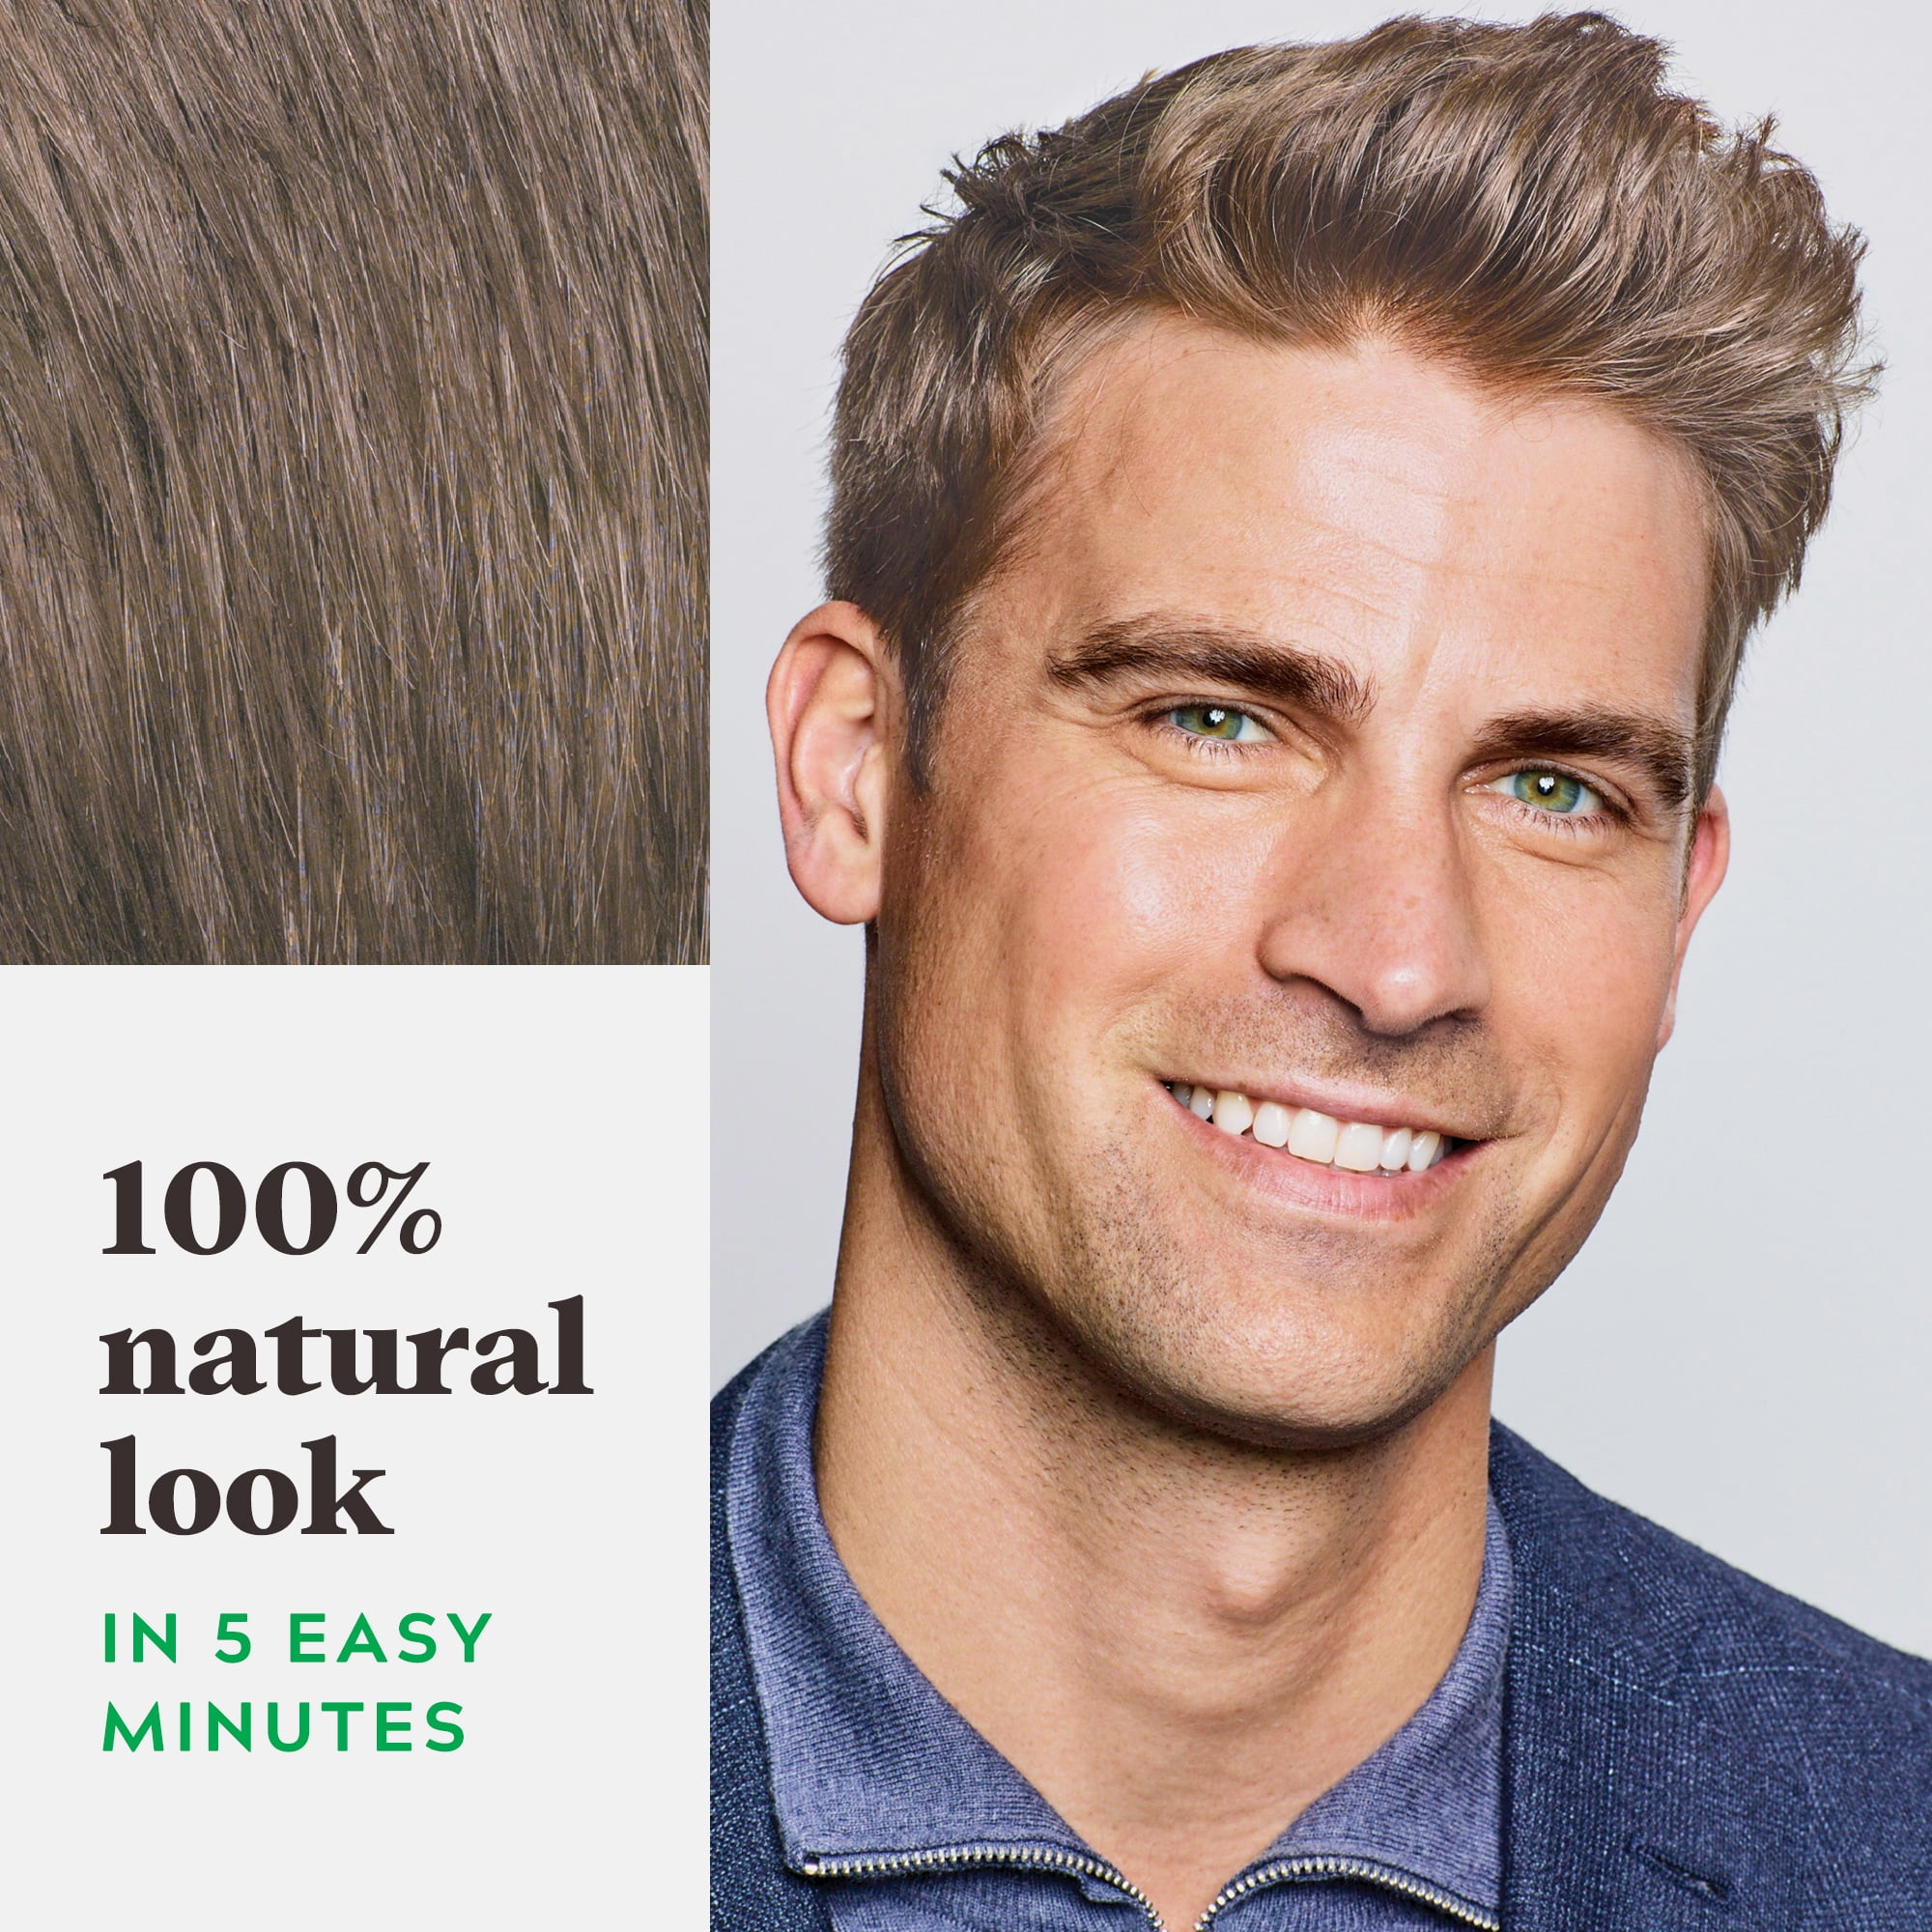 The Complete Guide To Men's Highlights | Best Highlights For Men